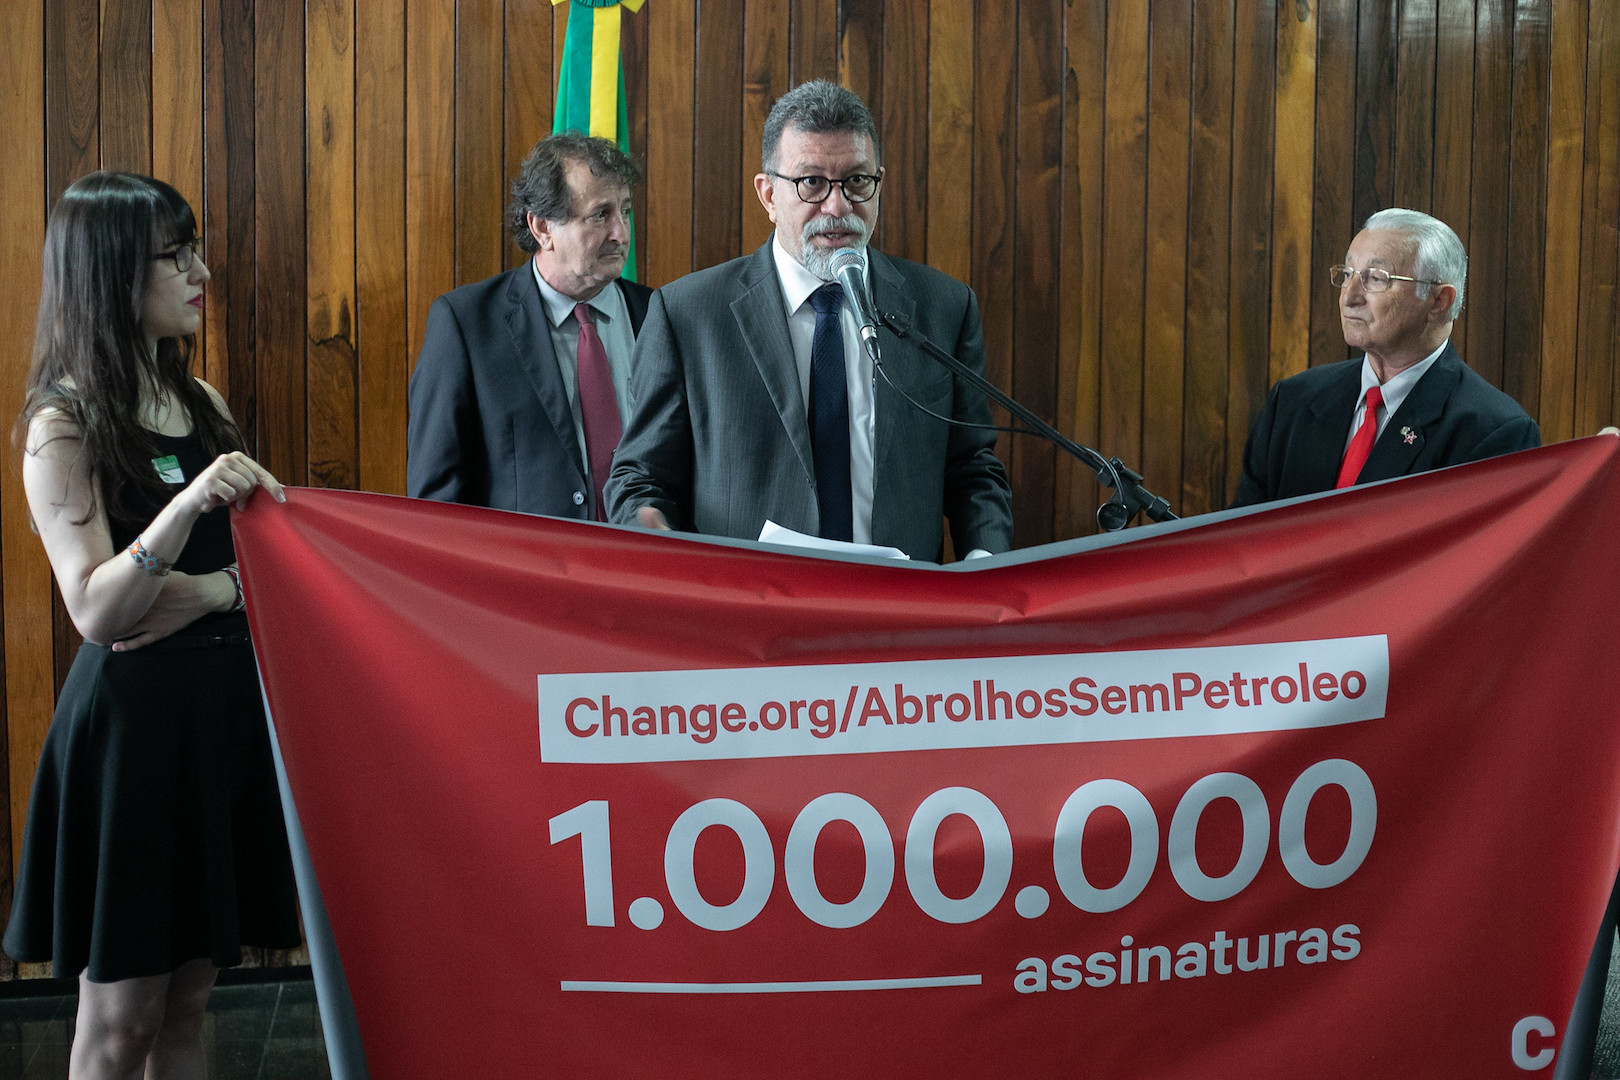 Brazil,Over one million people signed a petition to keep Abrolhos region out of the petroleum auction.